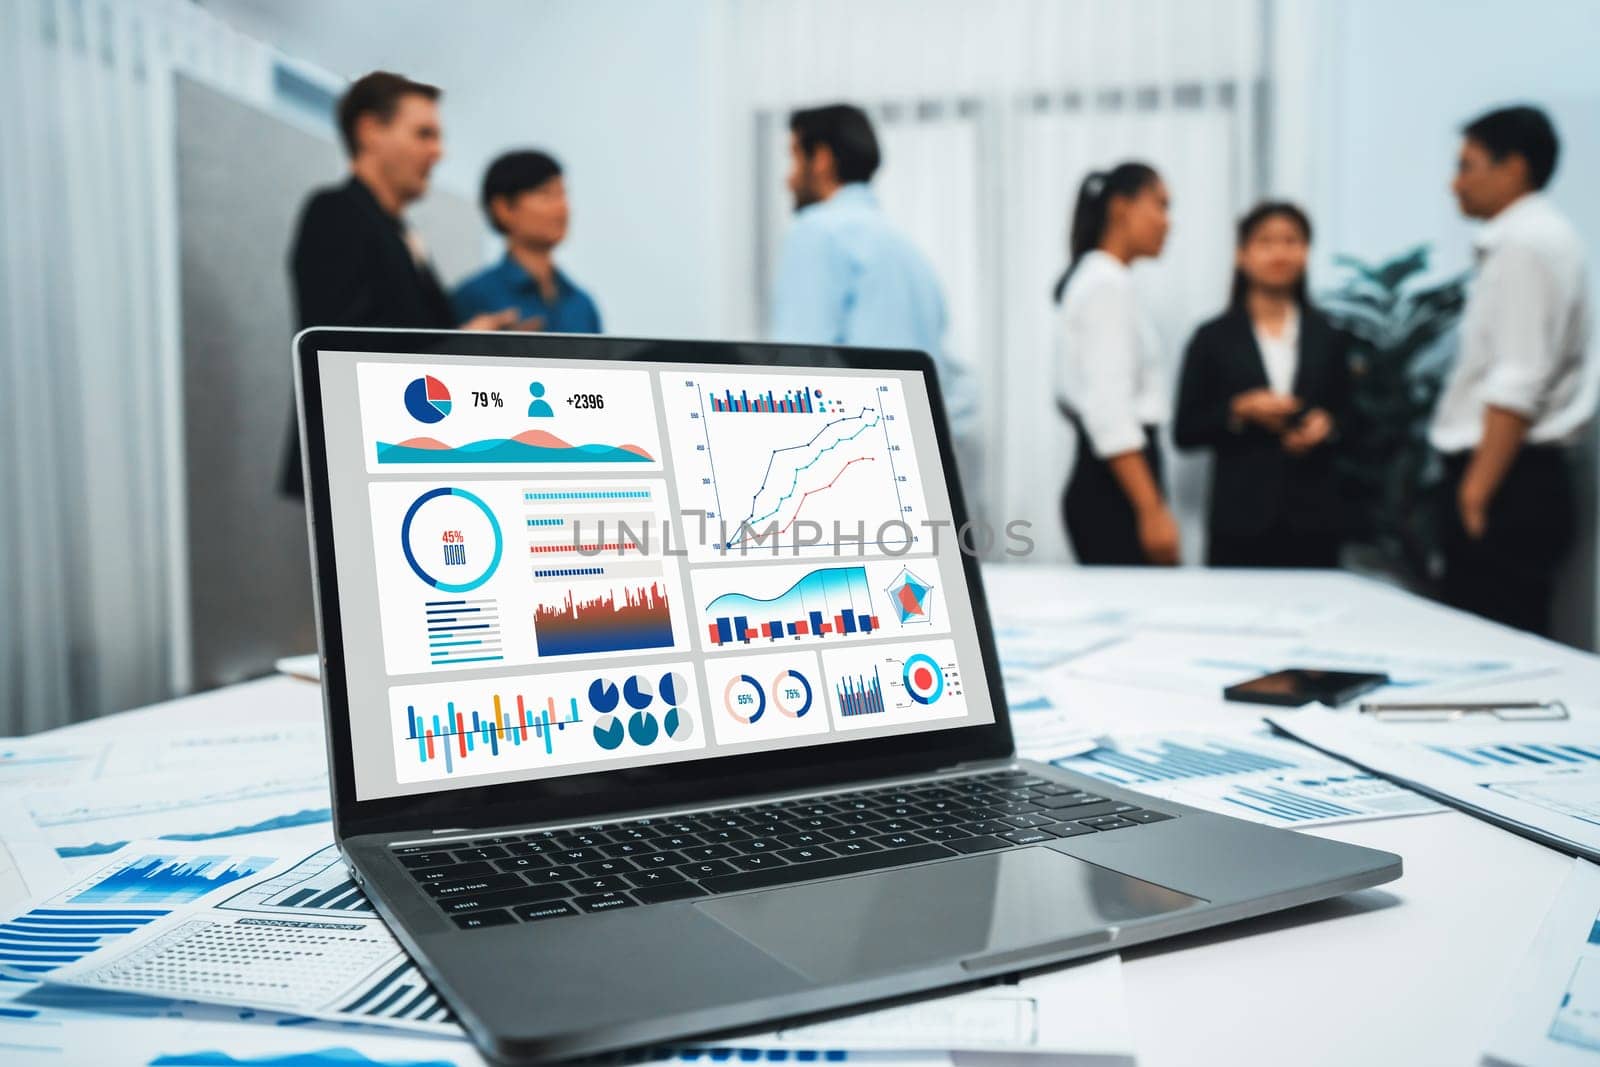 Analytic database by BI Fintech dashboard displayed on laptop for analyzed financial data on blur background with business people analyzing for insights power into business marketing planning.Prudent